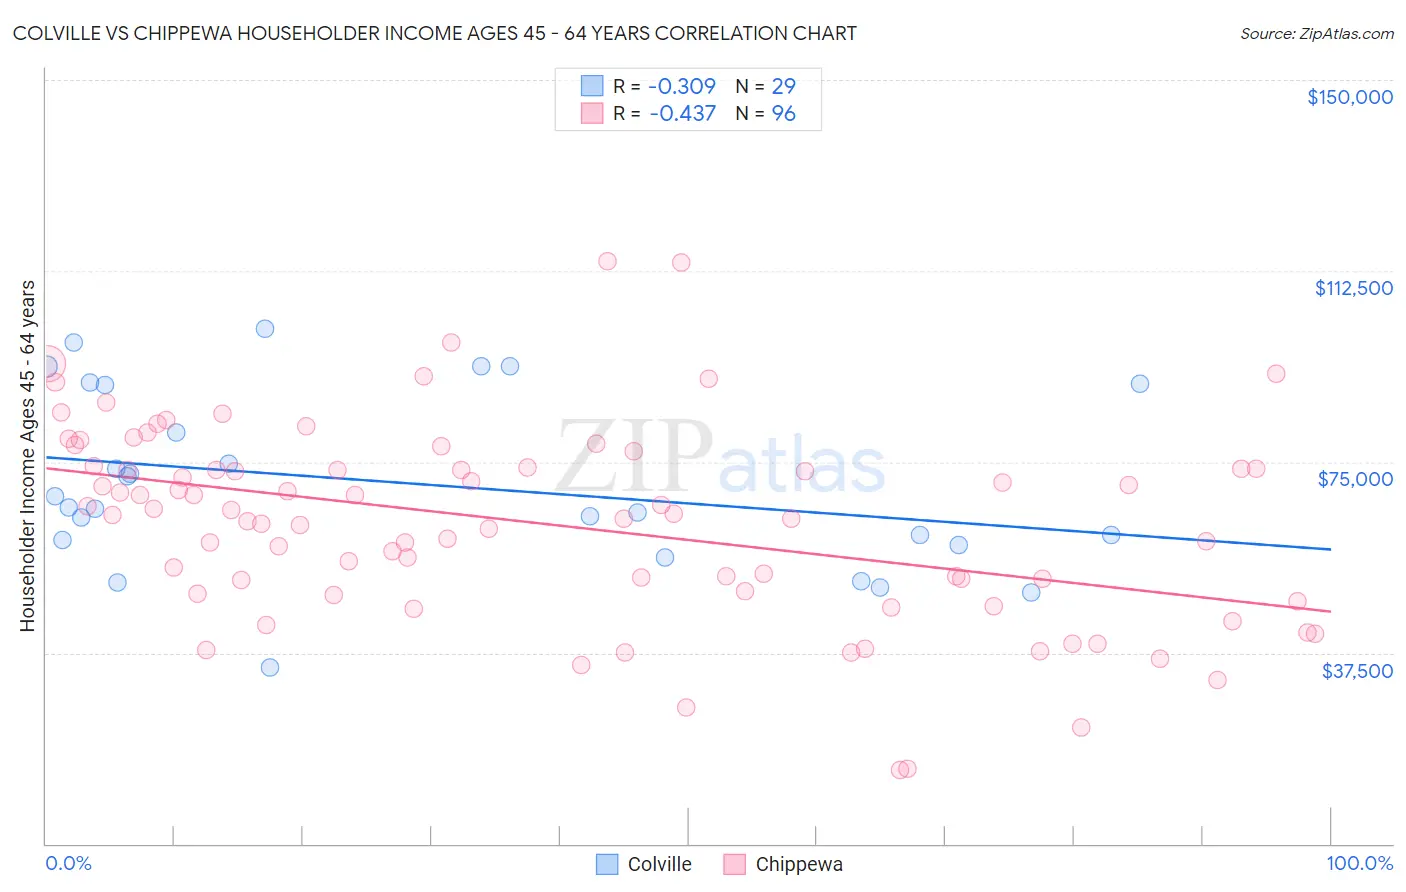 Colville vs Chippewa Householder Income Ages 45 - 64 years